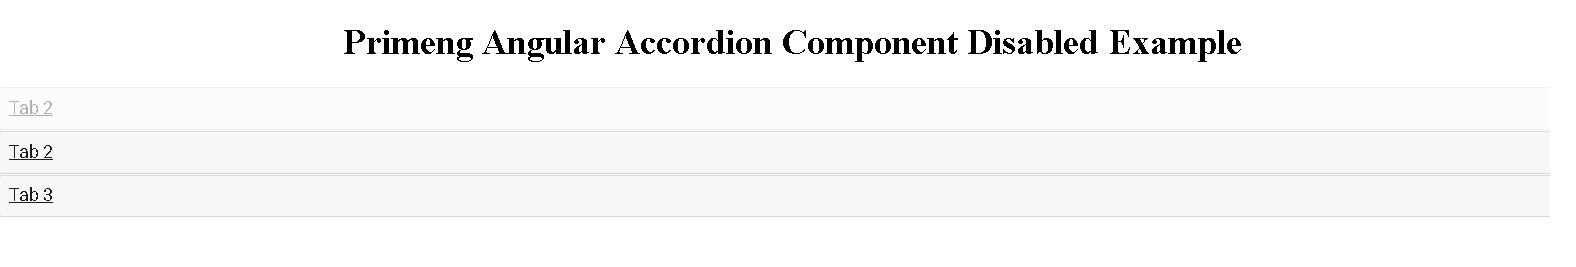 primeng accordion disable example 